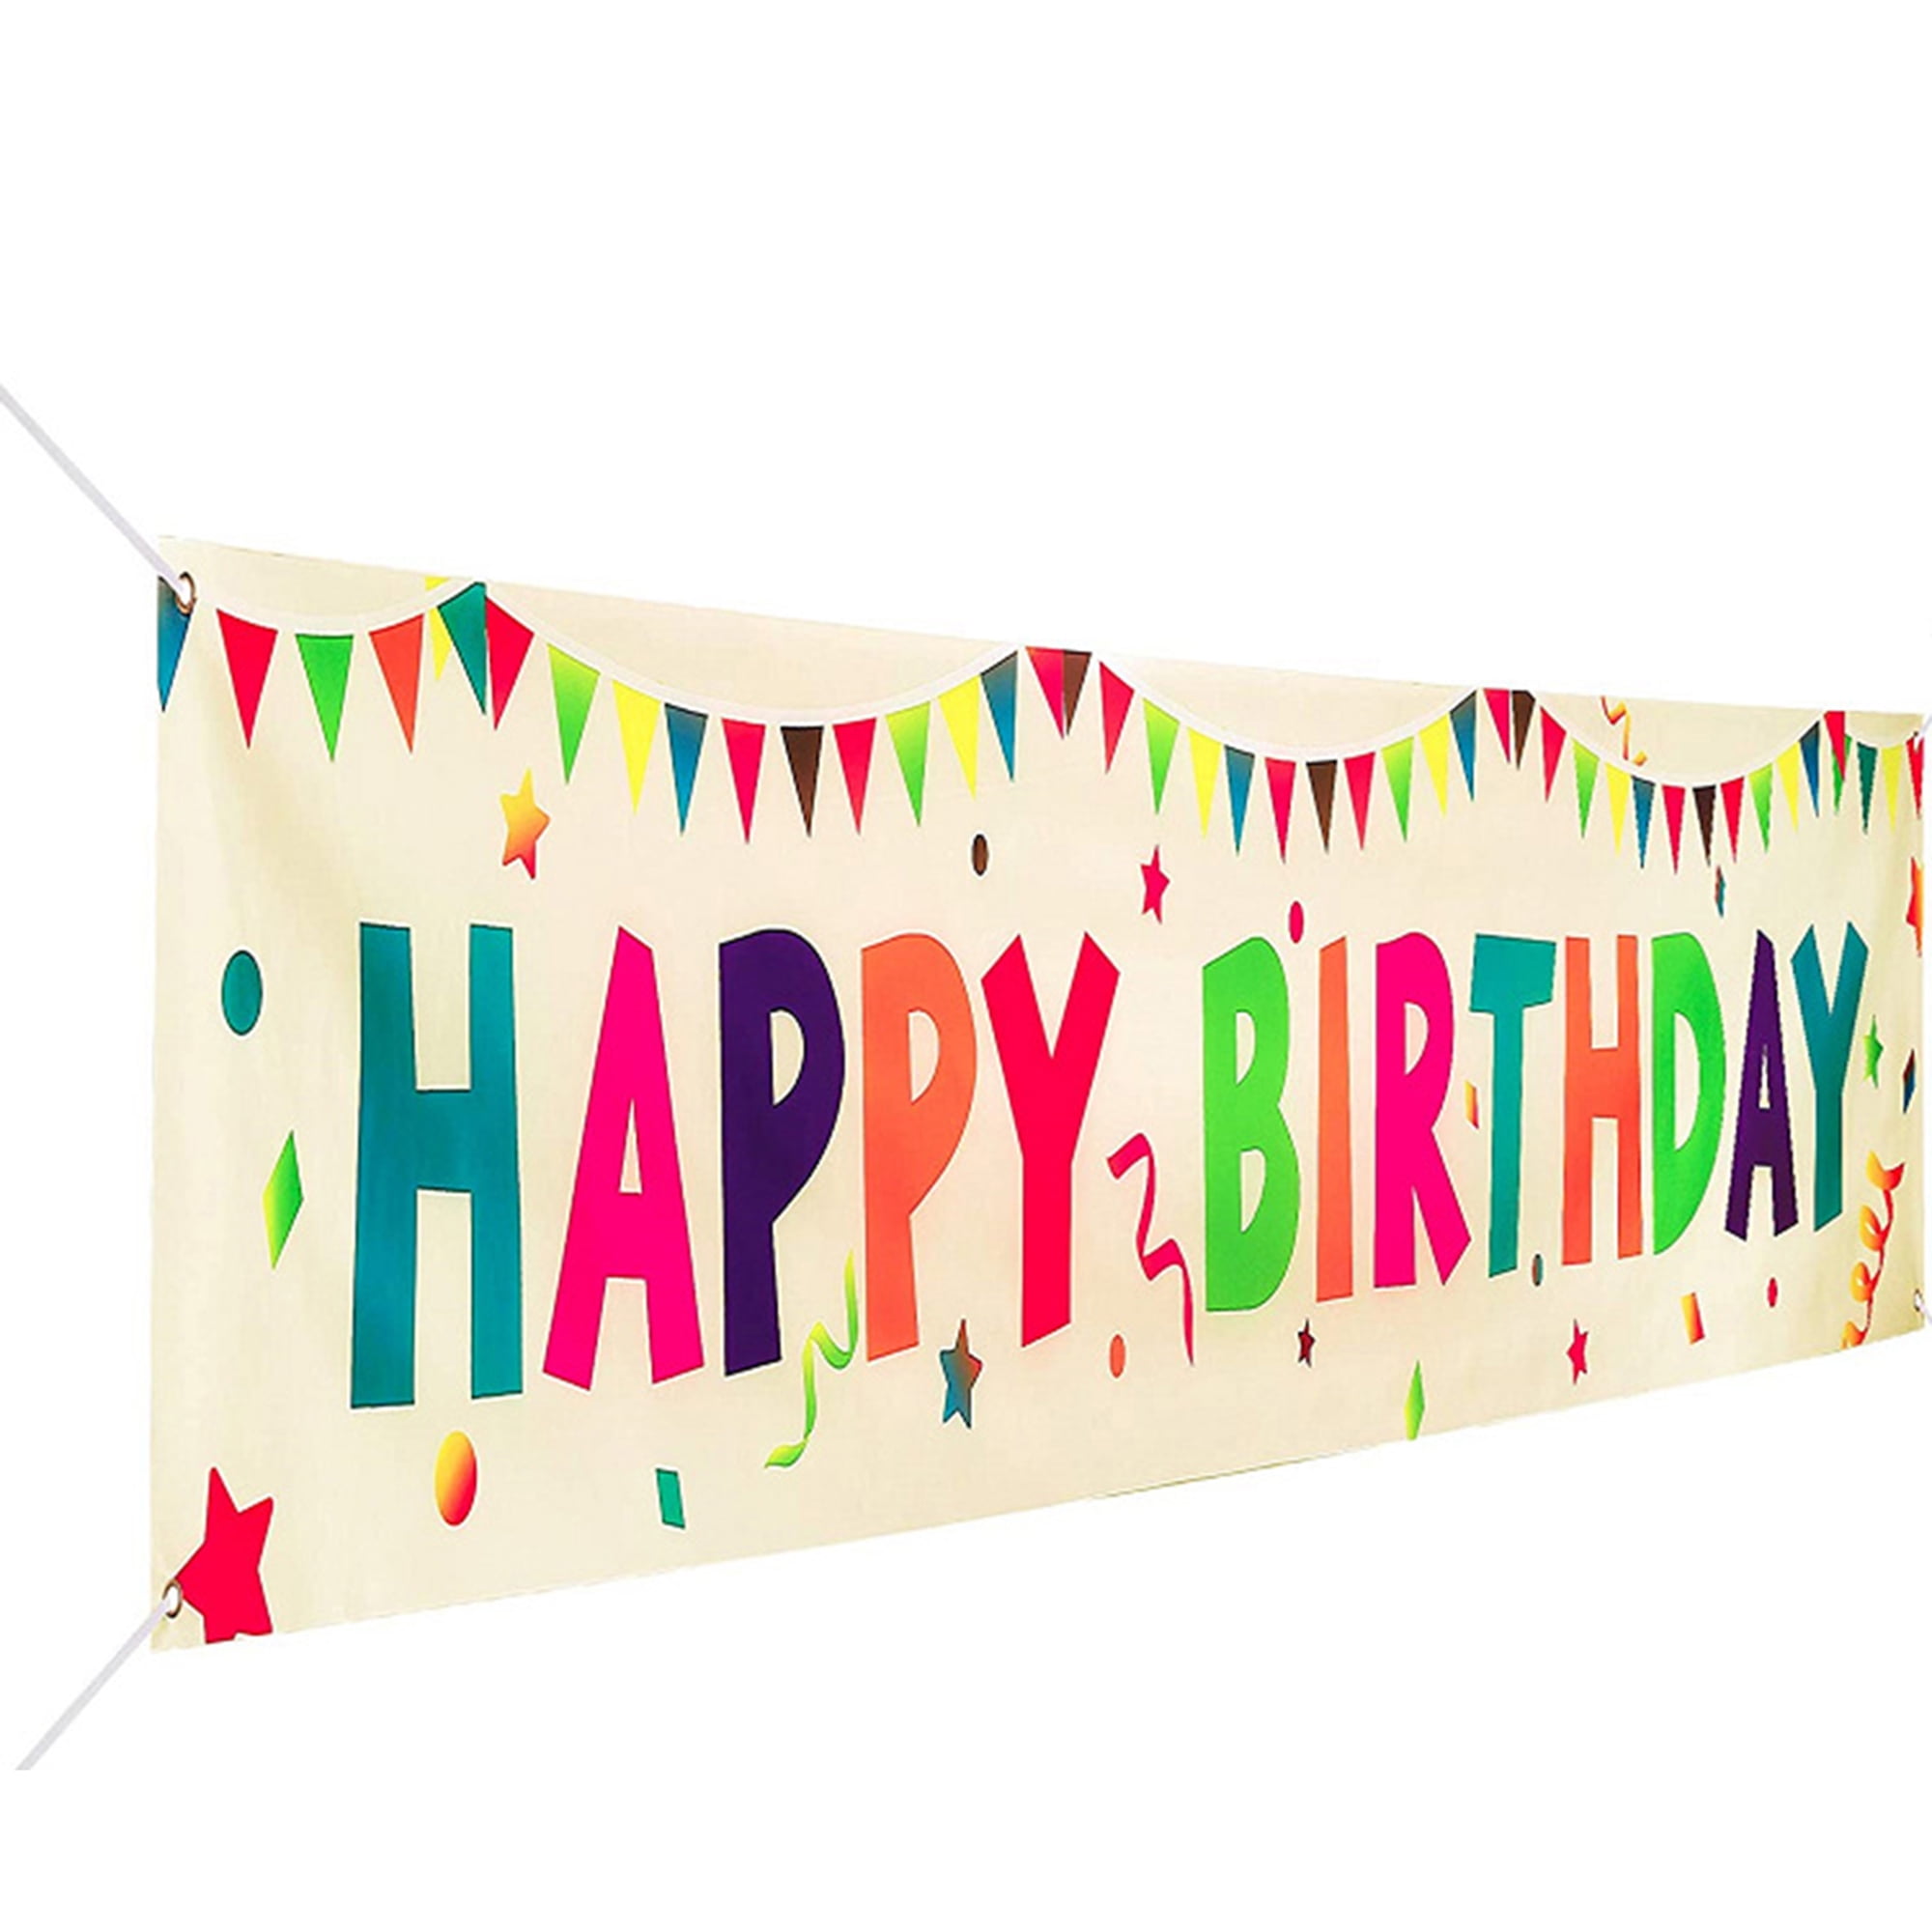 HAPPY 4th BIRTHDAY BANNER 2FT X 6FT NEW LARGER SIZE